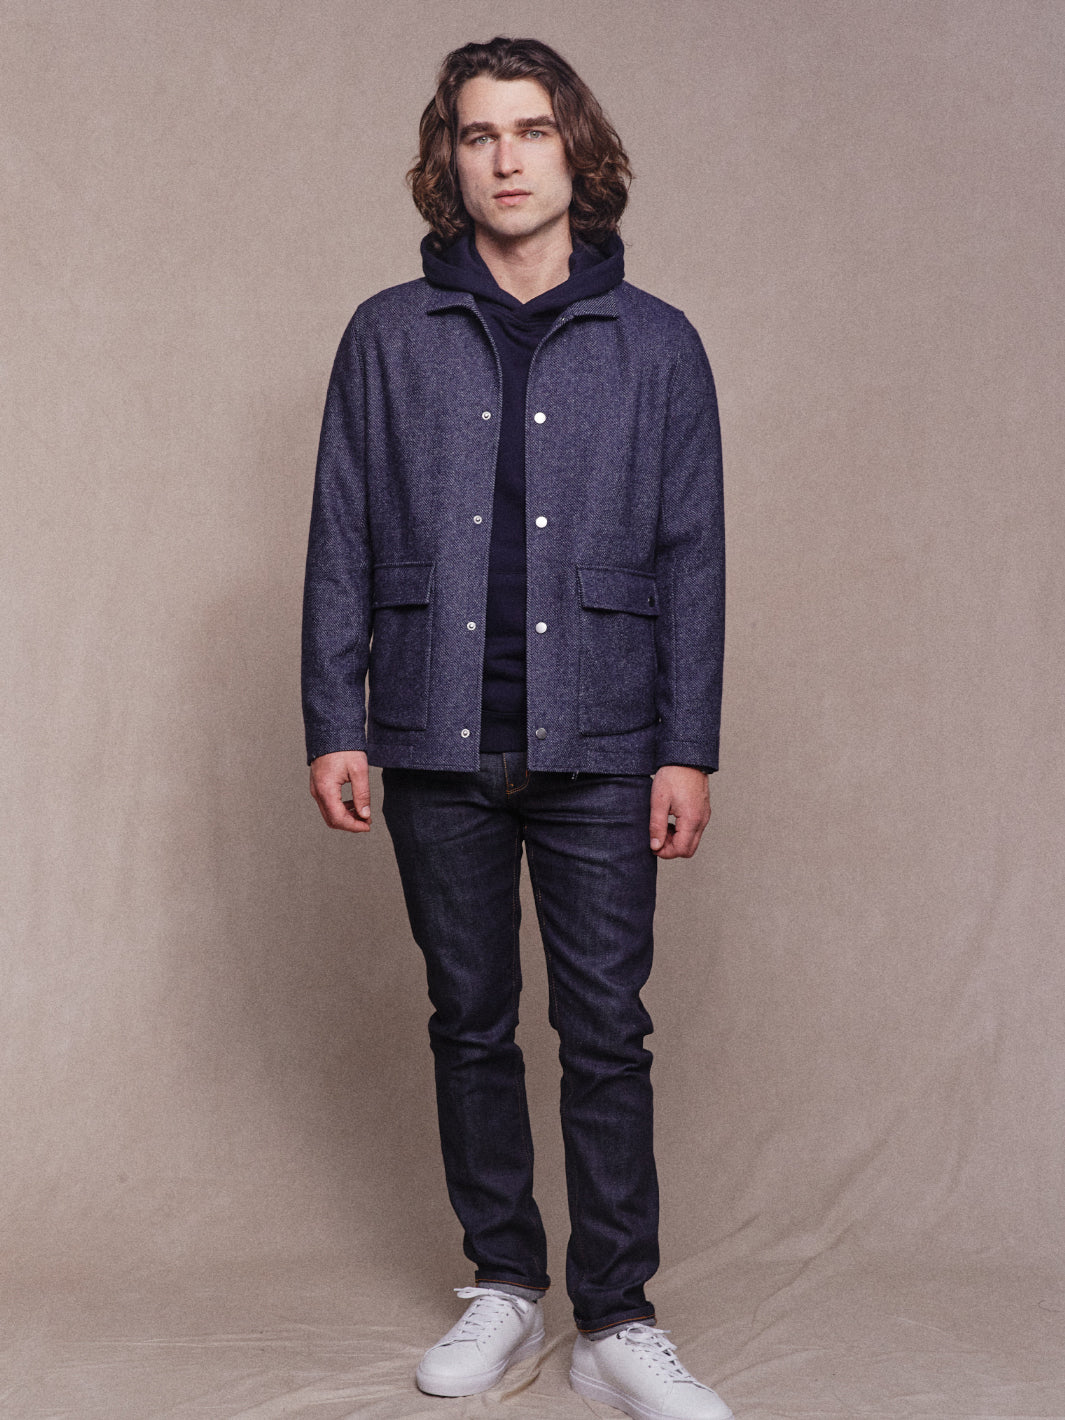 Full body image of model wearing Heavy Woollen Overshirt in Navy with Navy Hoodie, Navy Jeans and White Sneakers